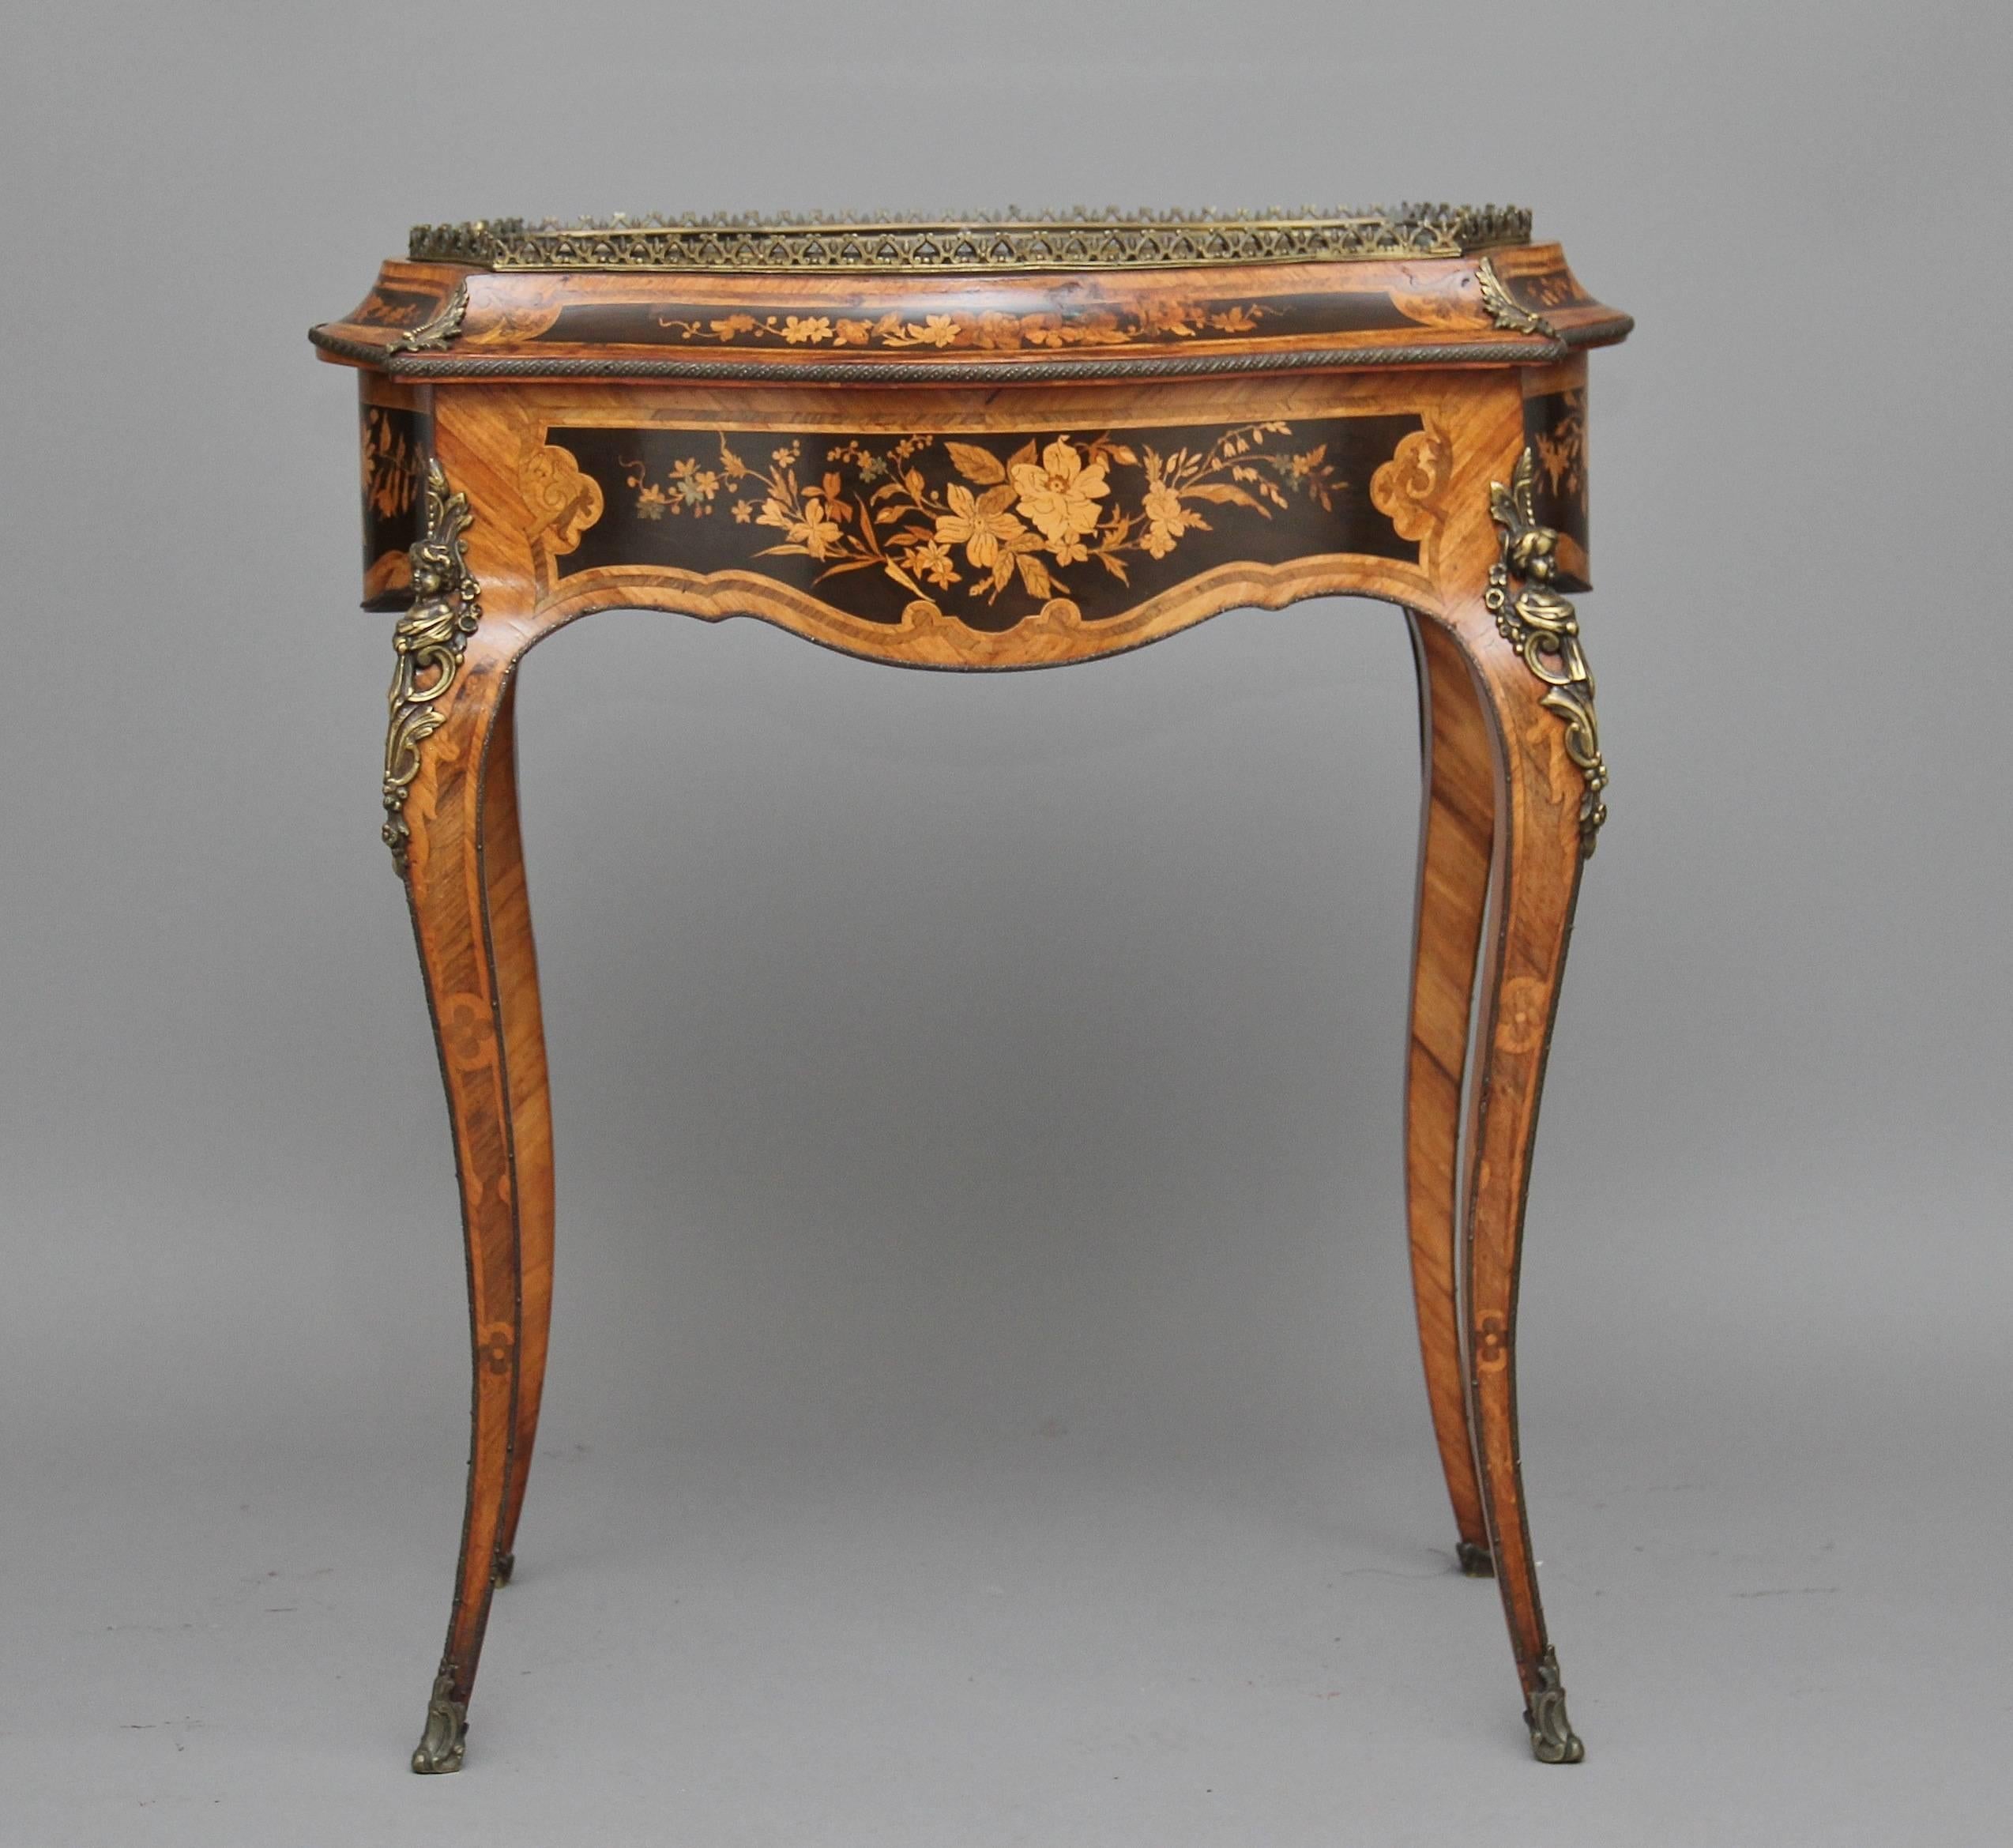 European 19th Century French Inlaid Kingwood Bijouterie Table